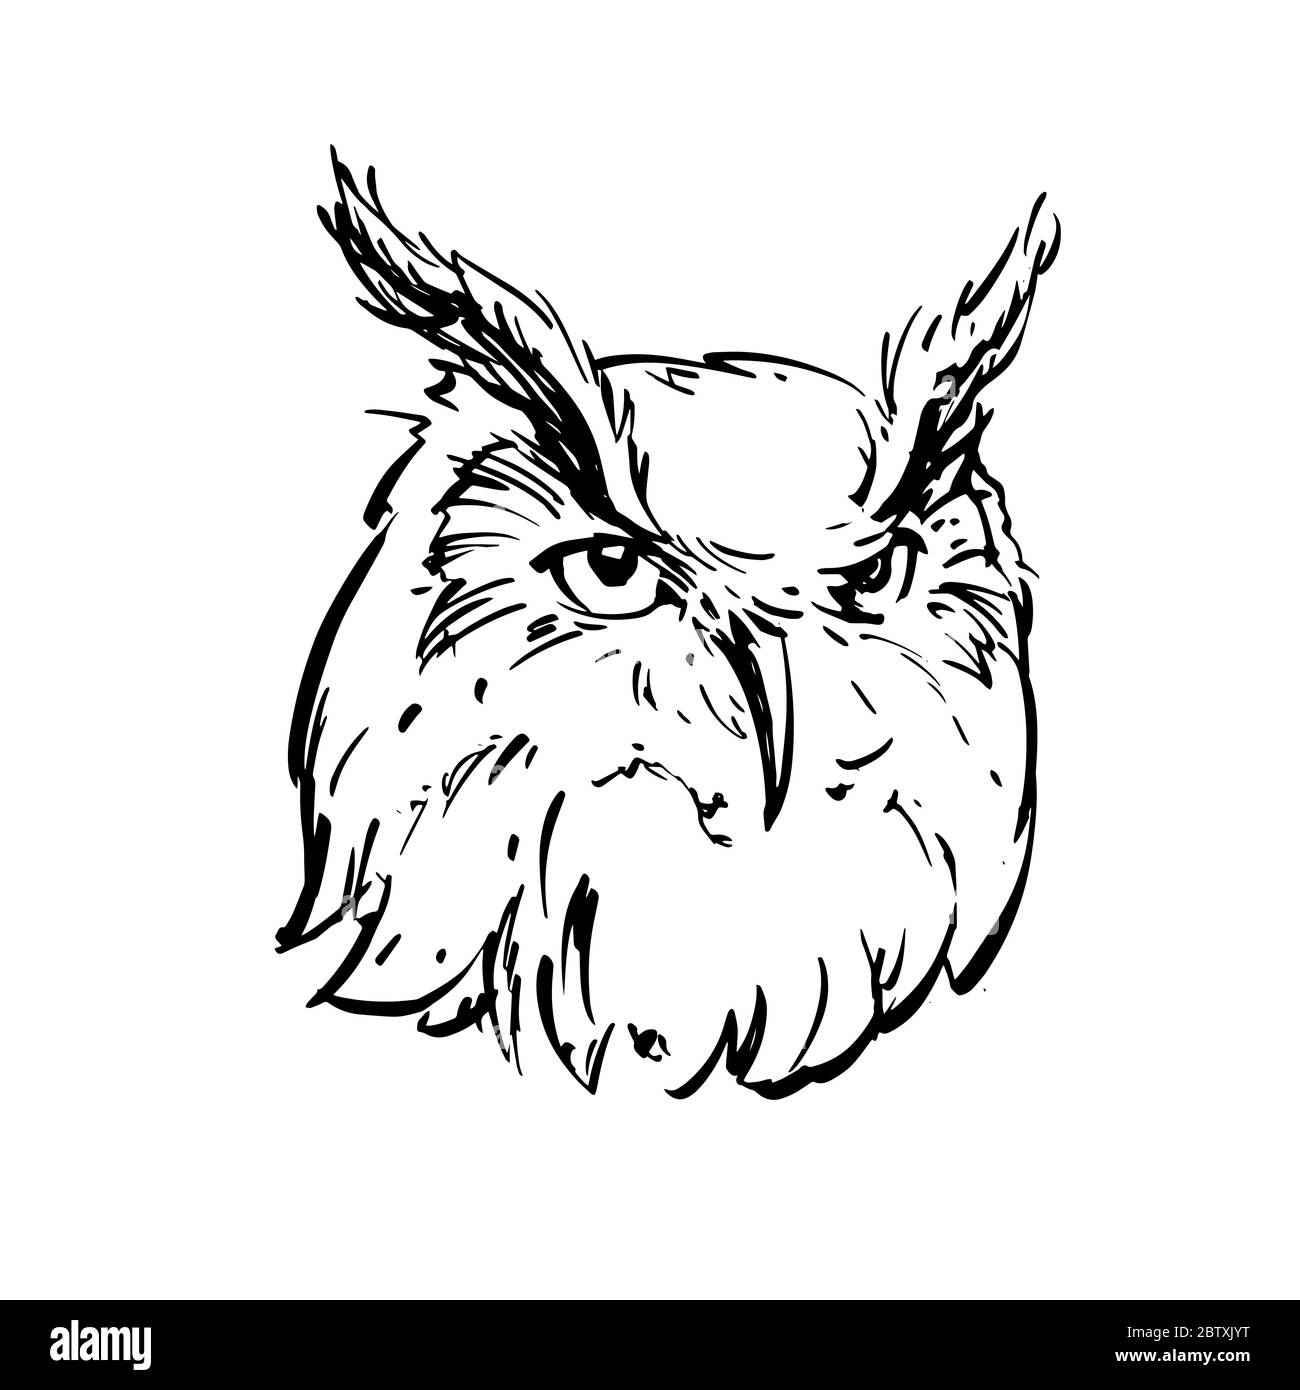 Realistic black and white drawing of an owl's head. For coloring. Stock Vector